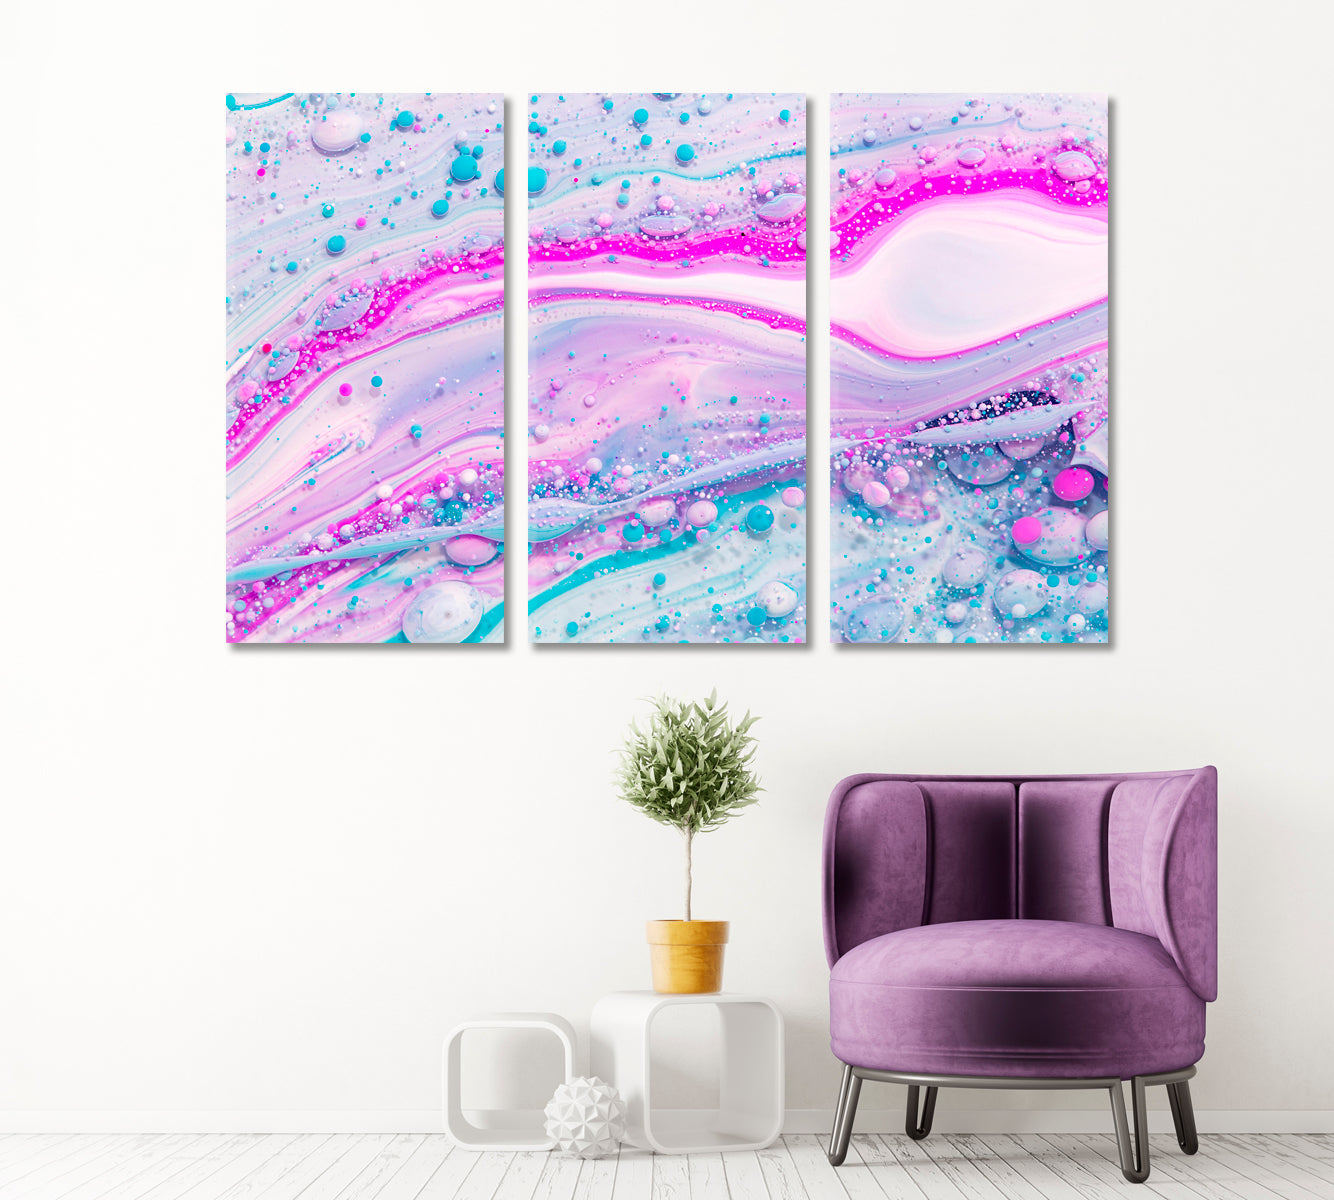 Fluid Abstract Mixed Paint Flowing Bubbles Canvas Print ArtLexy 3 Panels 36"x24" inches 